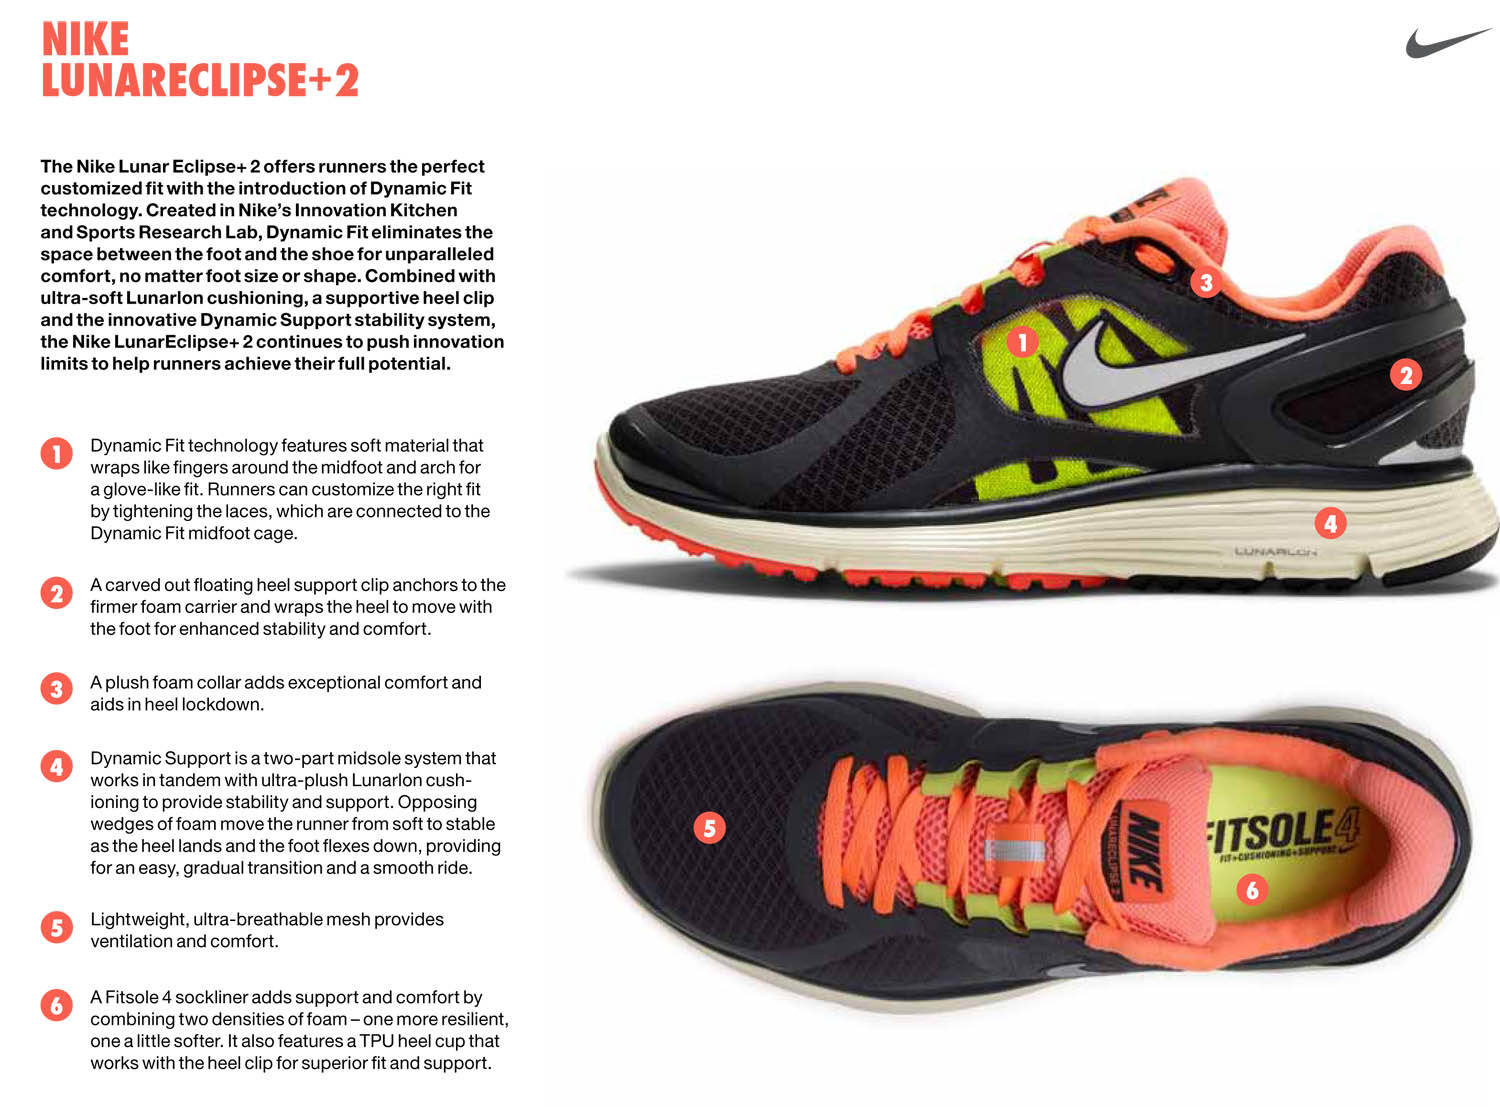 Nike Running Introduces Dynamic Fit with the Nike Lunareclipse+ 2 Tech Sheet